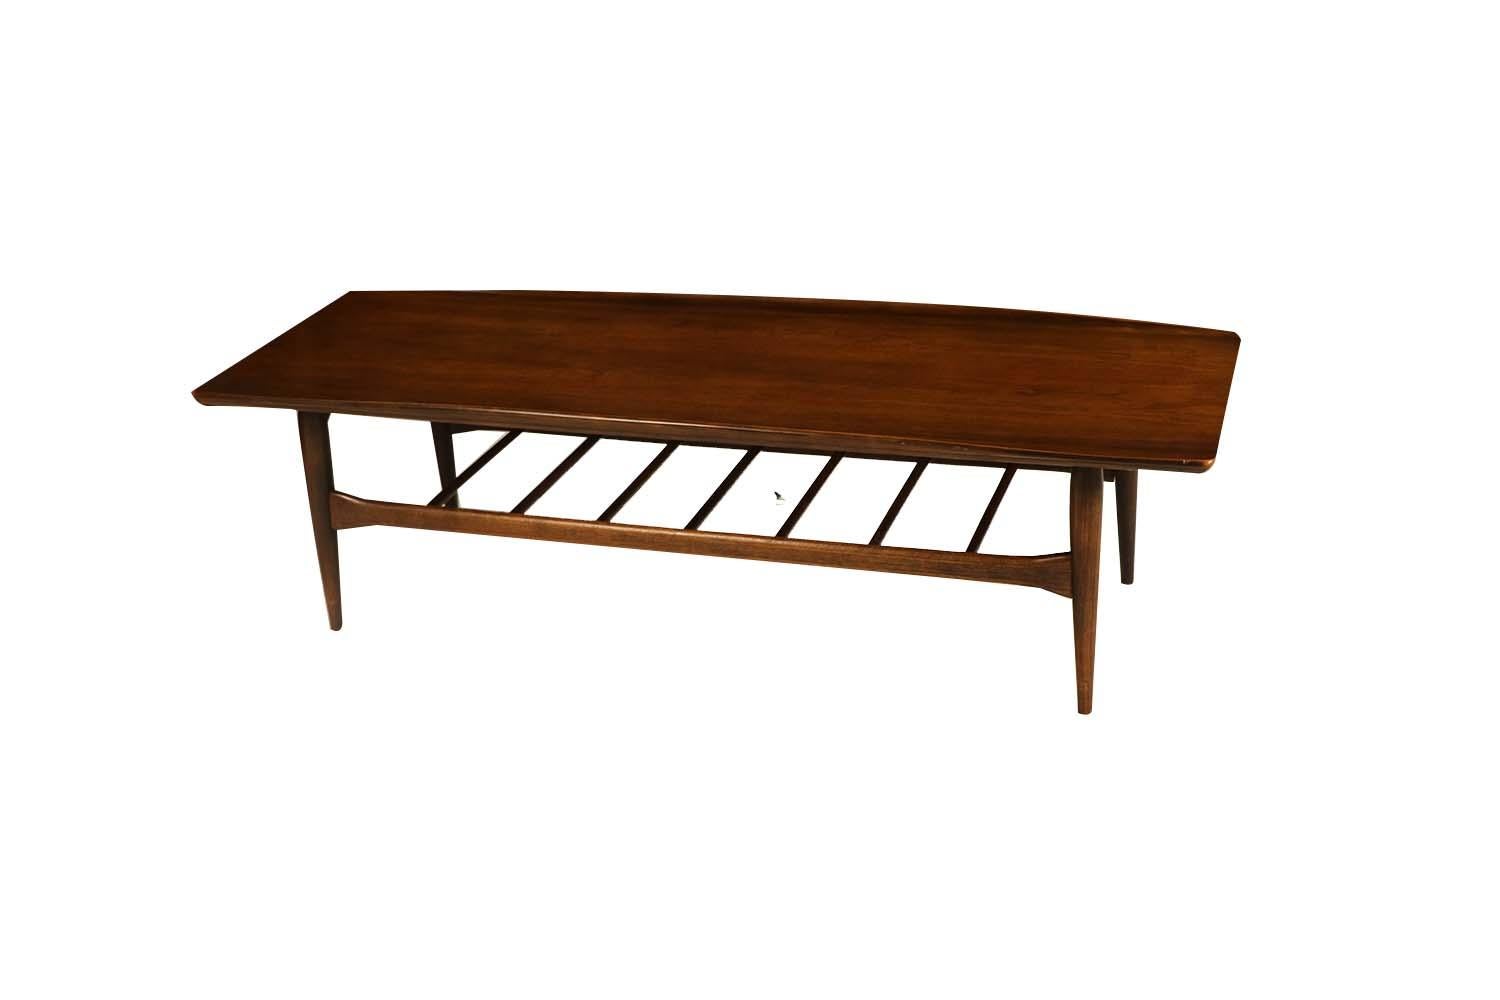 A beautiful, midcentury, modern, retro, 1960s, Danish style, coffee table, by Bassett Furniture Co. from the Artisan Collection, in the style of renown Danish Furniture designer Grete Jalk. The perfect length to pair with an extra long sofa.